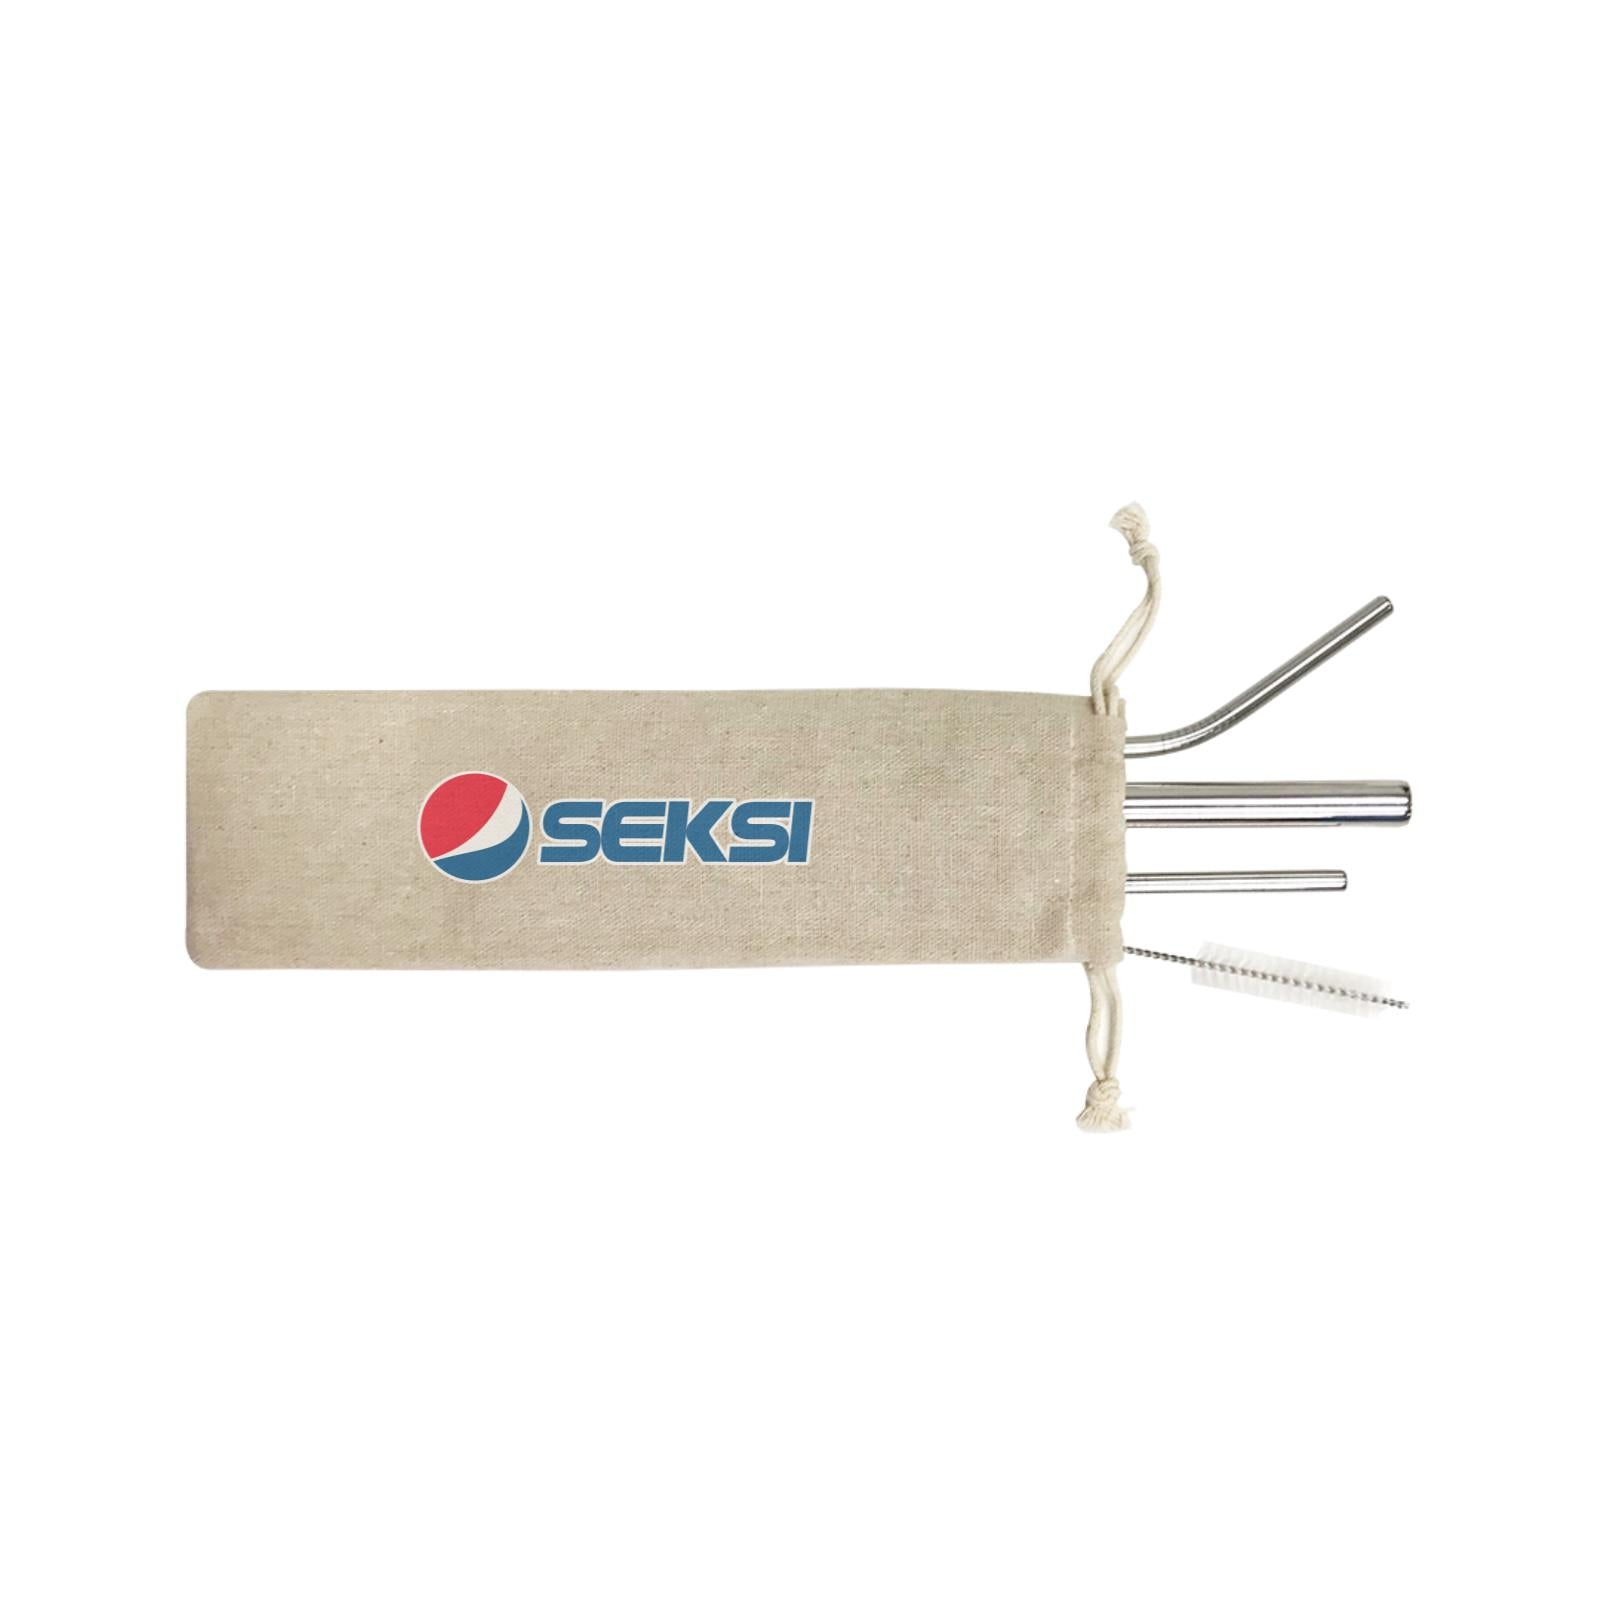 Slang Statement Seksi 4-in-1 Stainless Steel Straw Set In a Satchel